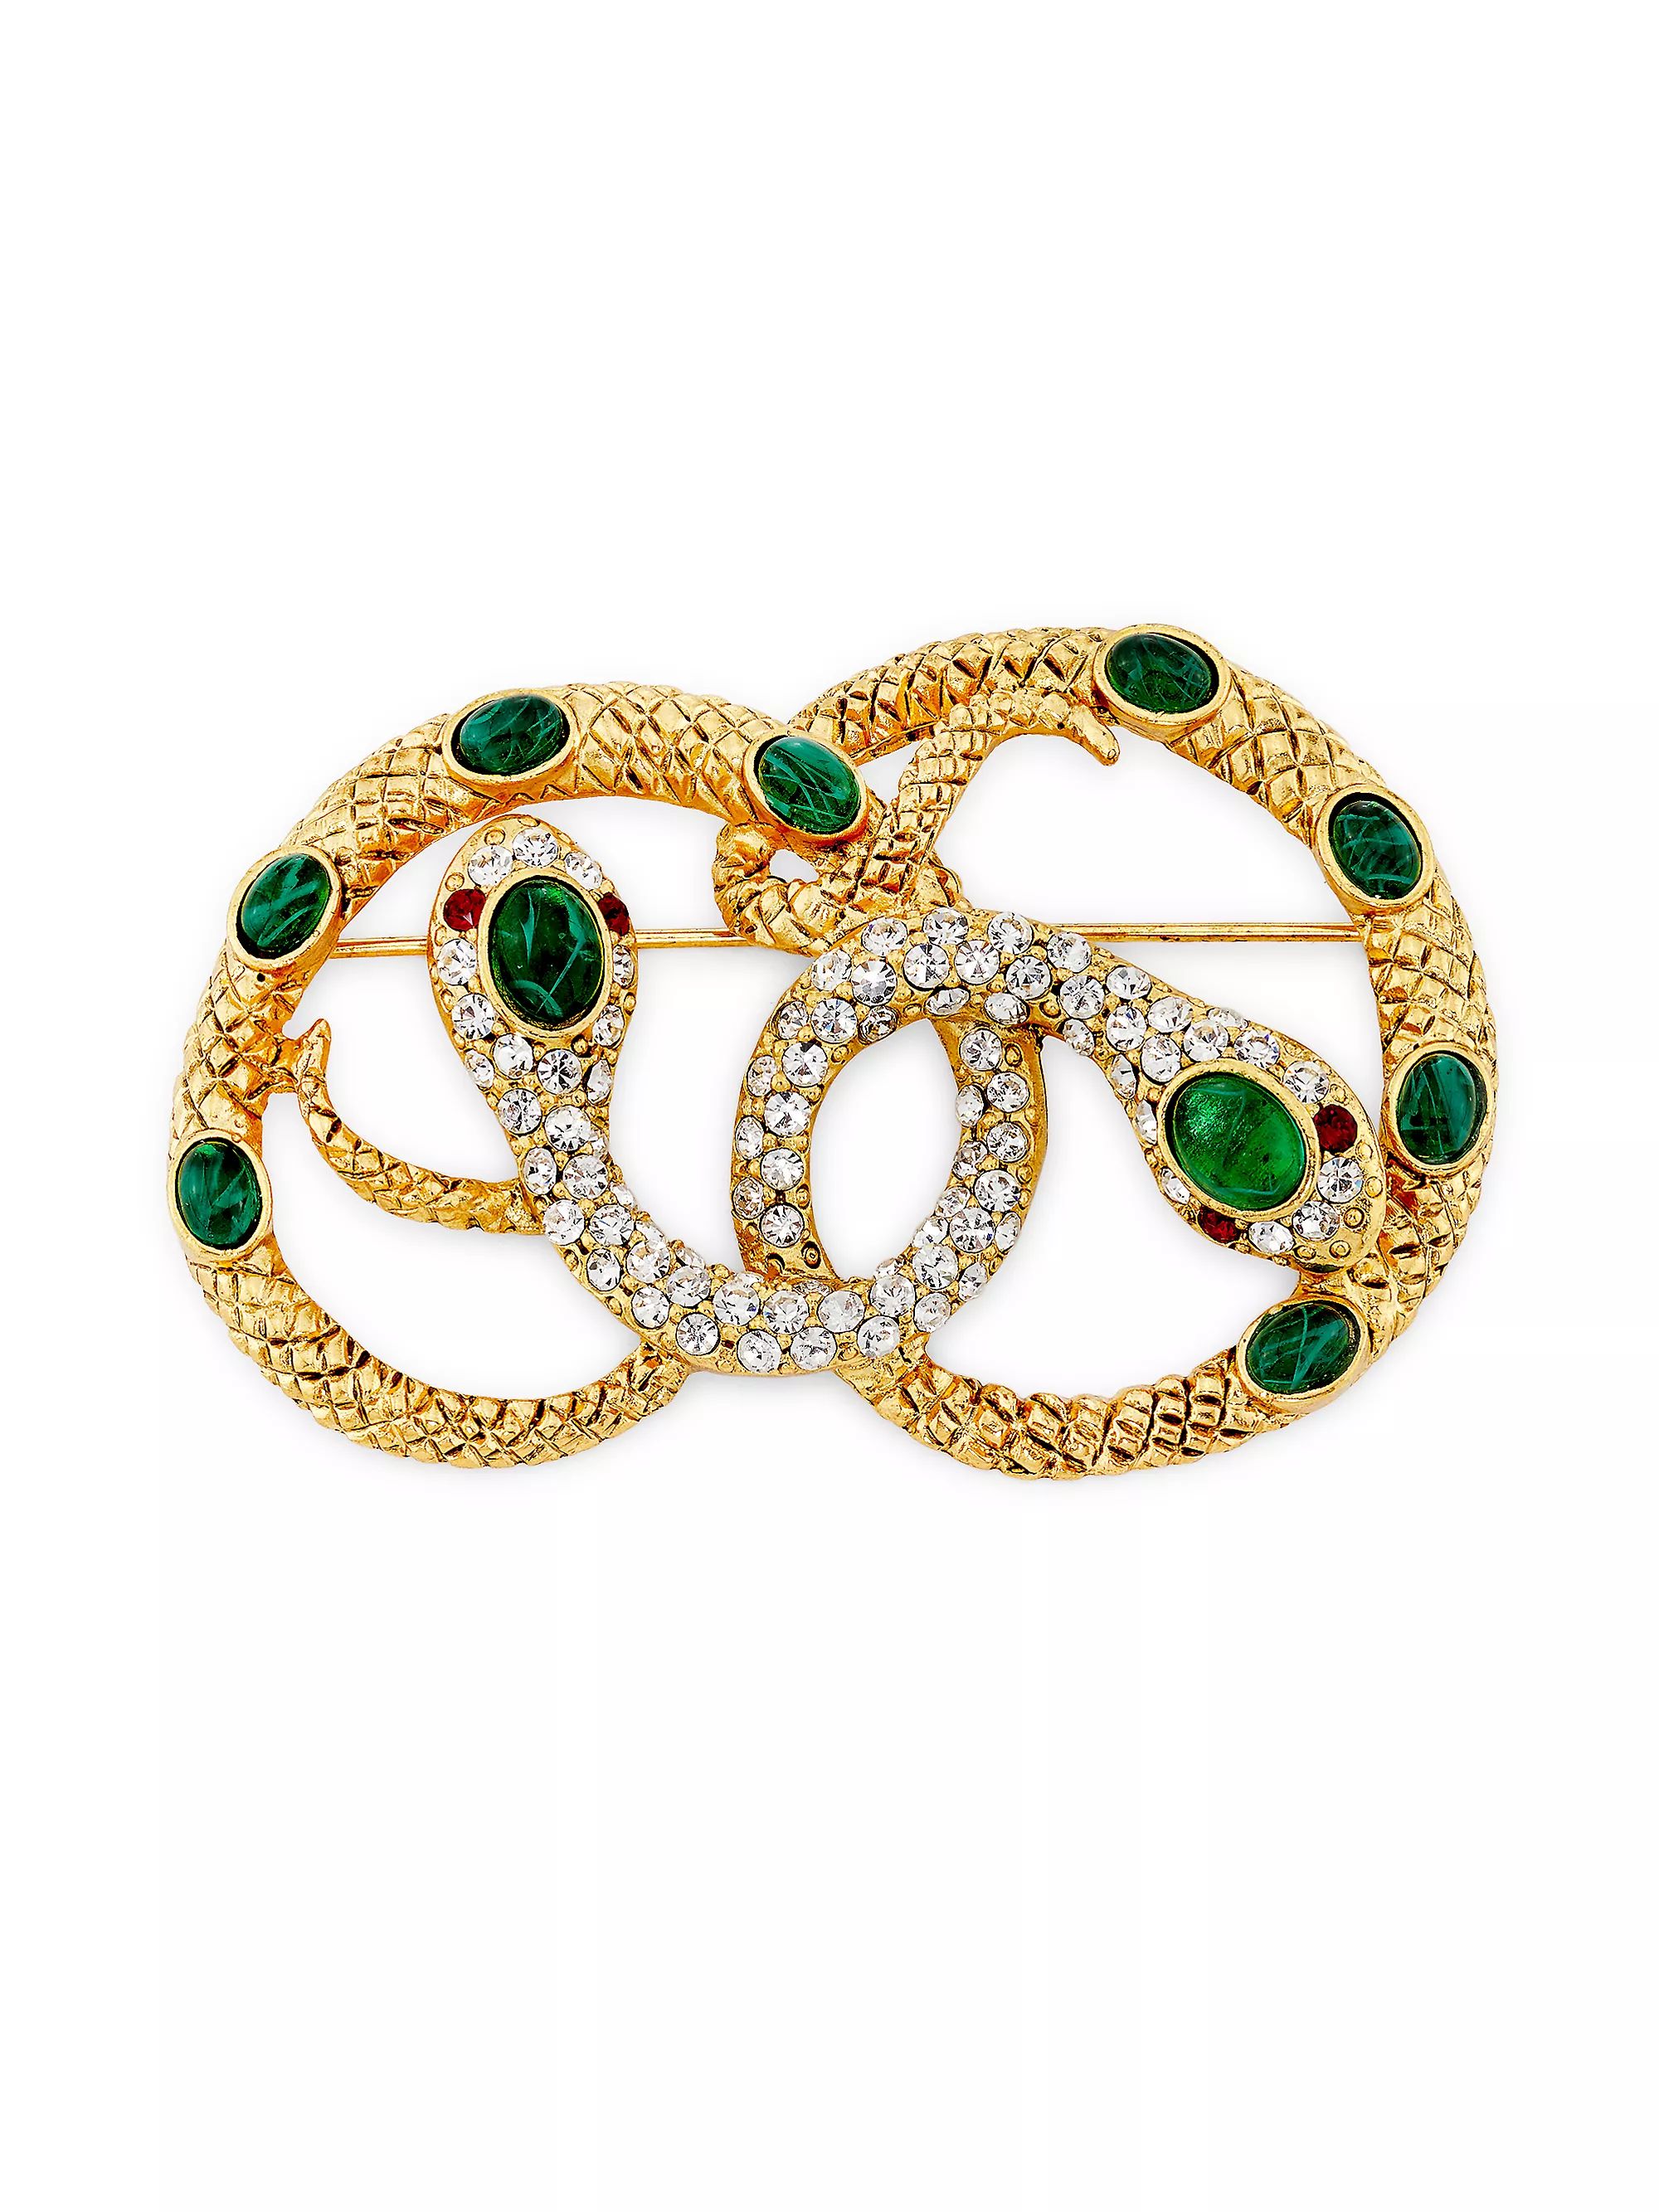 Double-Headed Snake 22K Gold-Plated & Glass Crystal Brooch | Saks Fifth Avenue